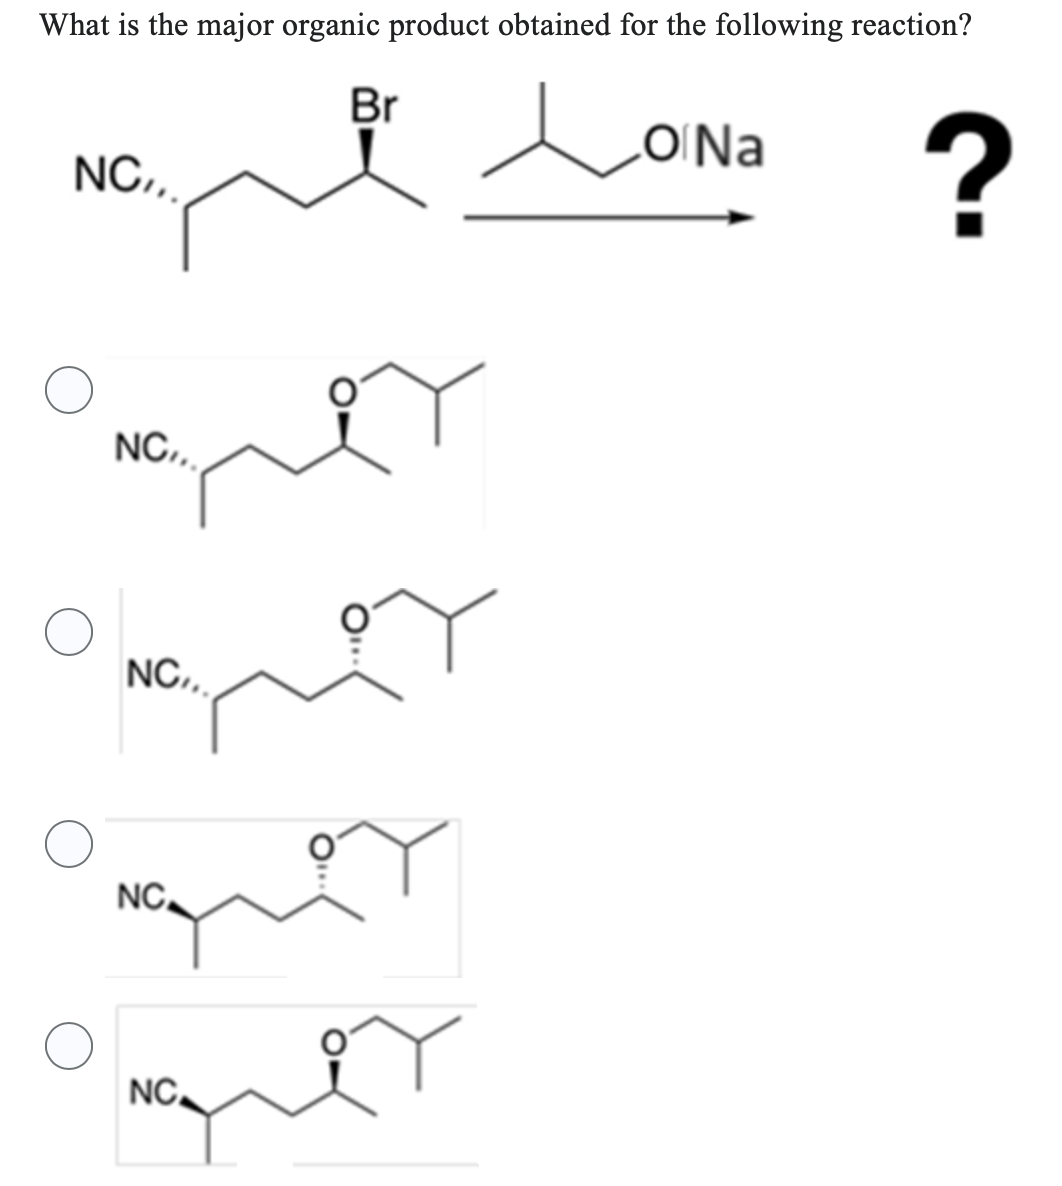 What is the major organic product obtained for the following reaction?
گرام
NC,,
NC...
NC.
mon
o
Br
NC.
O Na
?